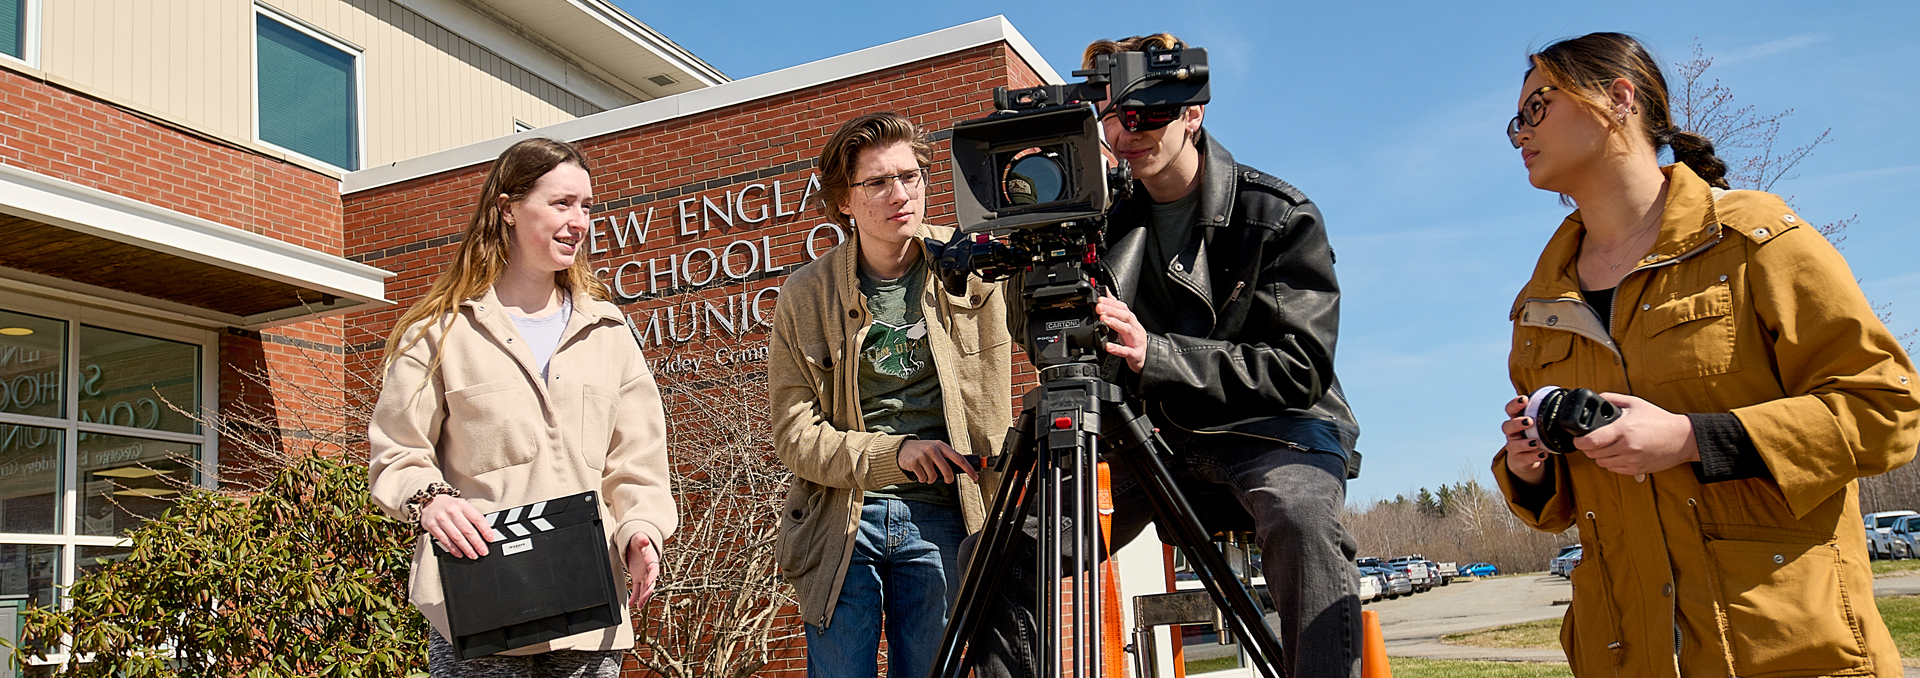 Video Production at Husson University